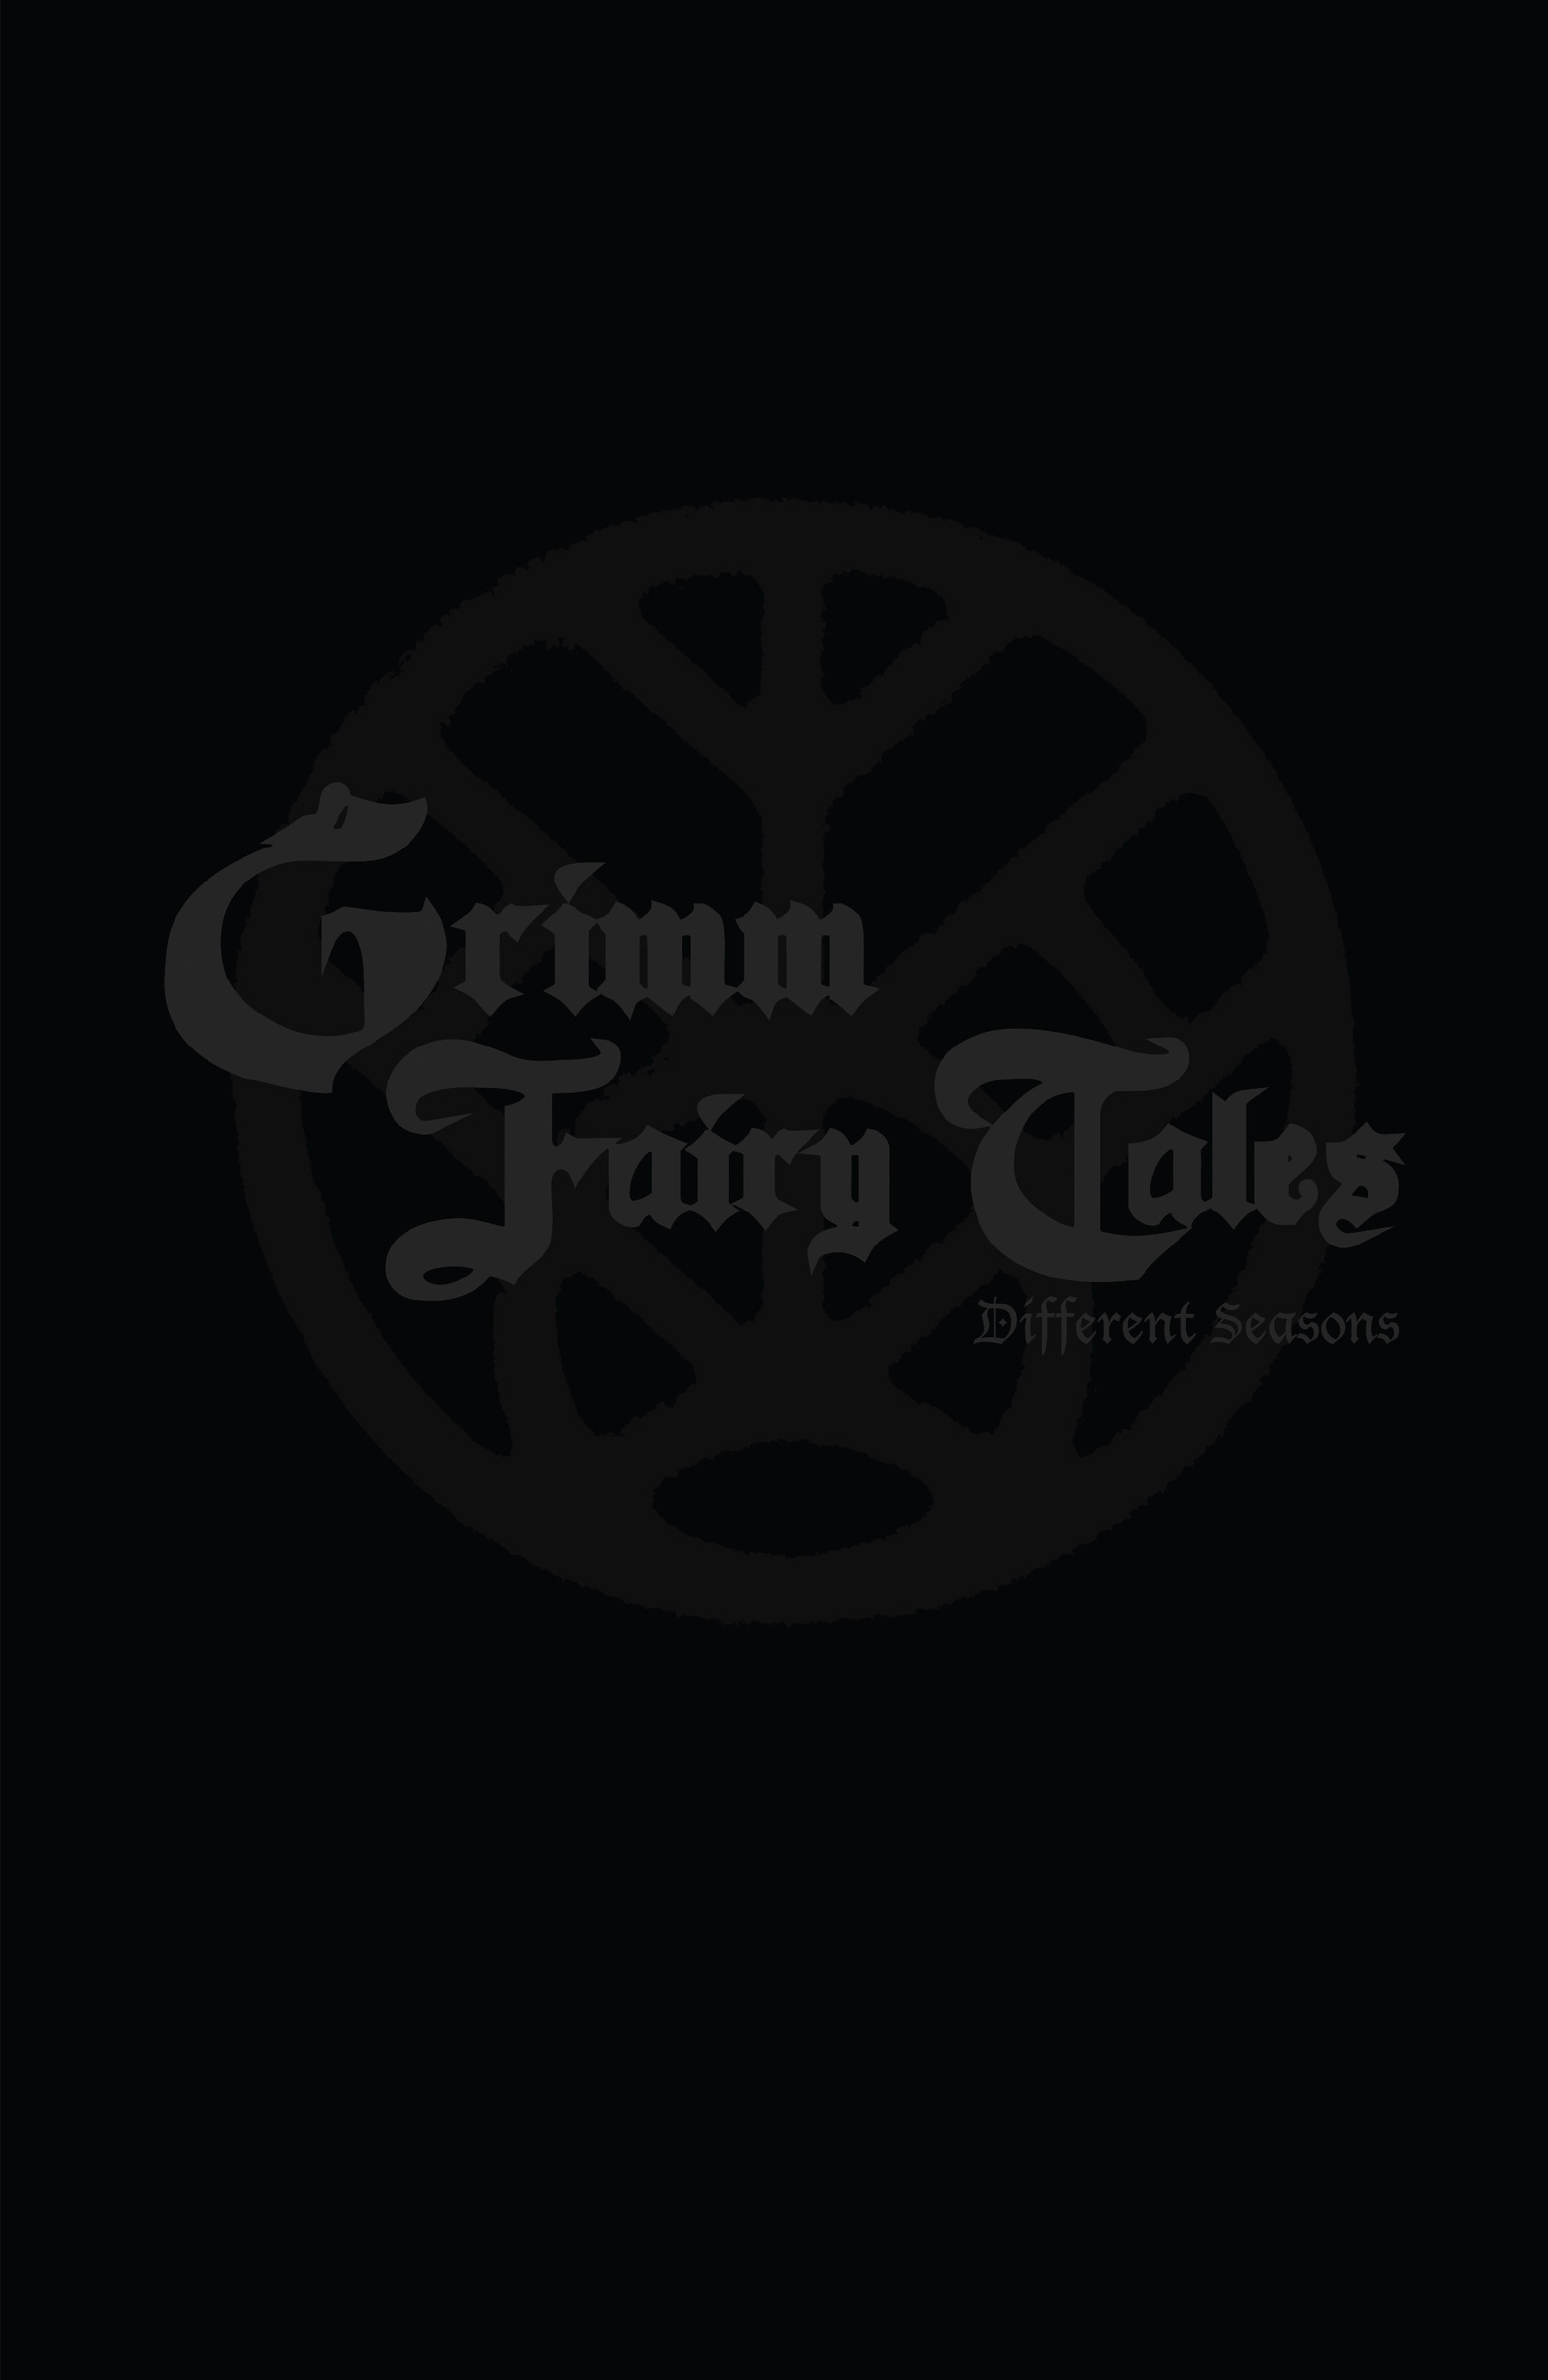 Read online Grimm Fairy Tales: Different Seasons comic -  Issue # TPB 1 - 52